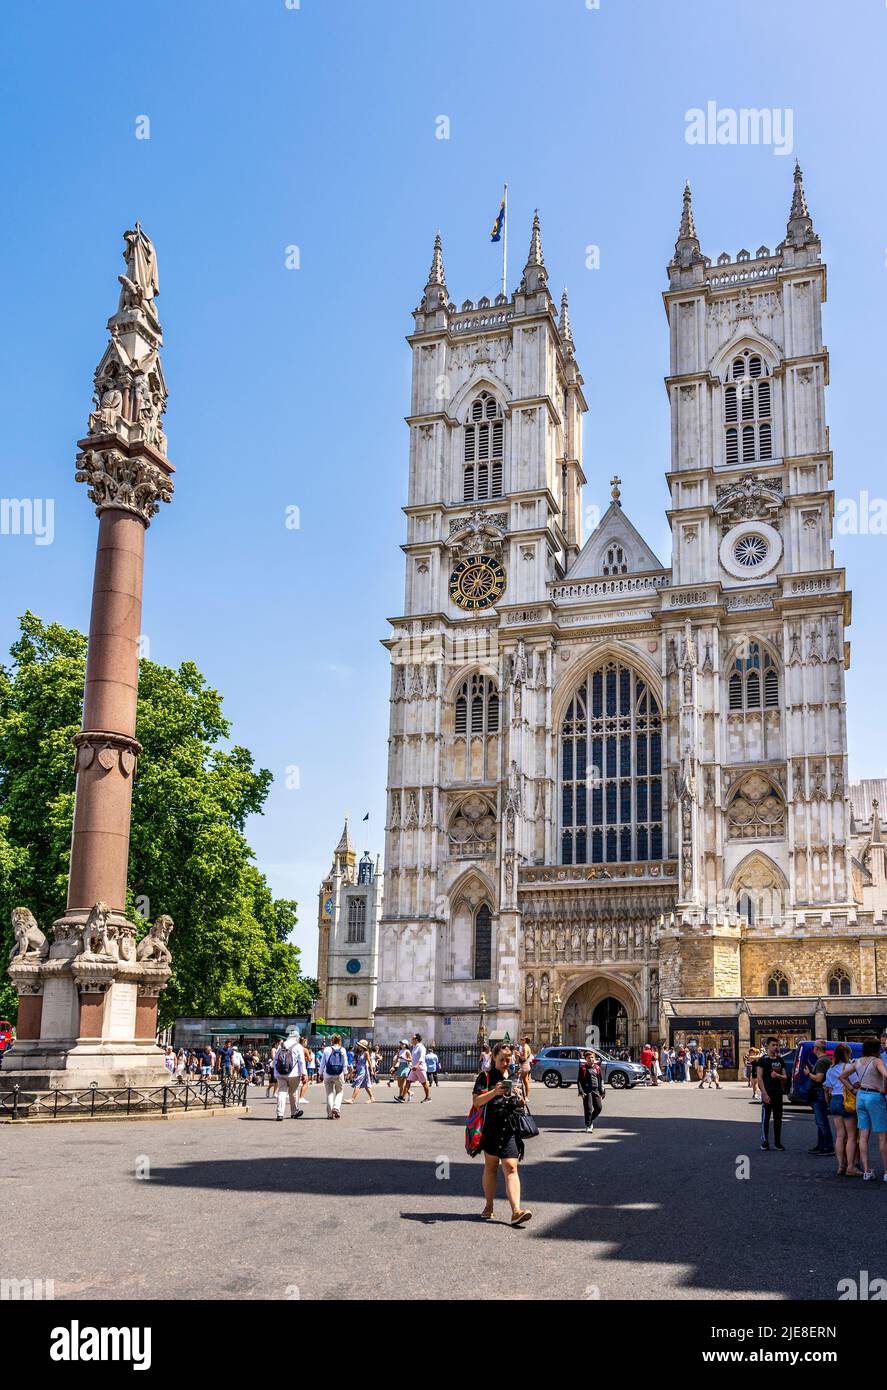 Western façade of Westminster Abbey, in Gothic style, burial place of English monarchs and famous people, City of Westminster, London, England, UK Stock Photo